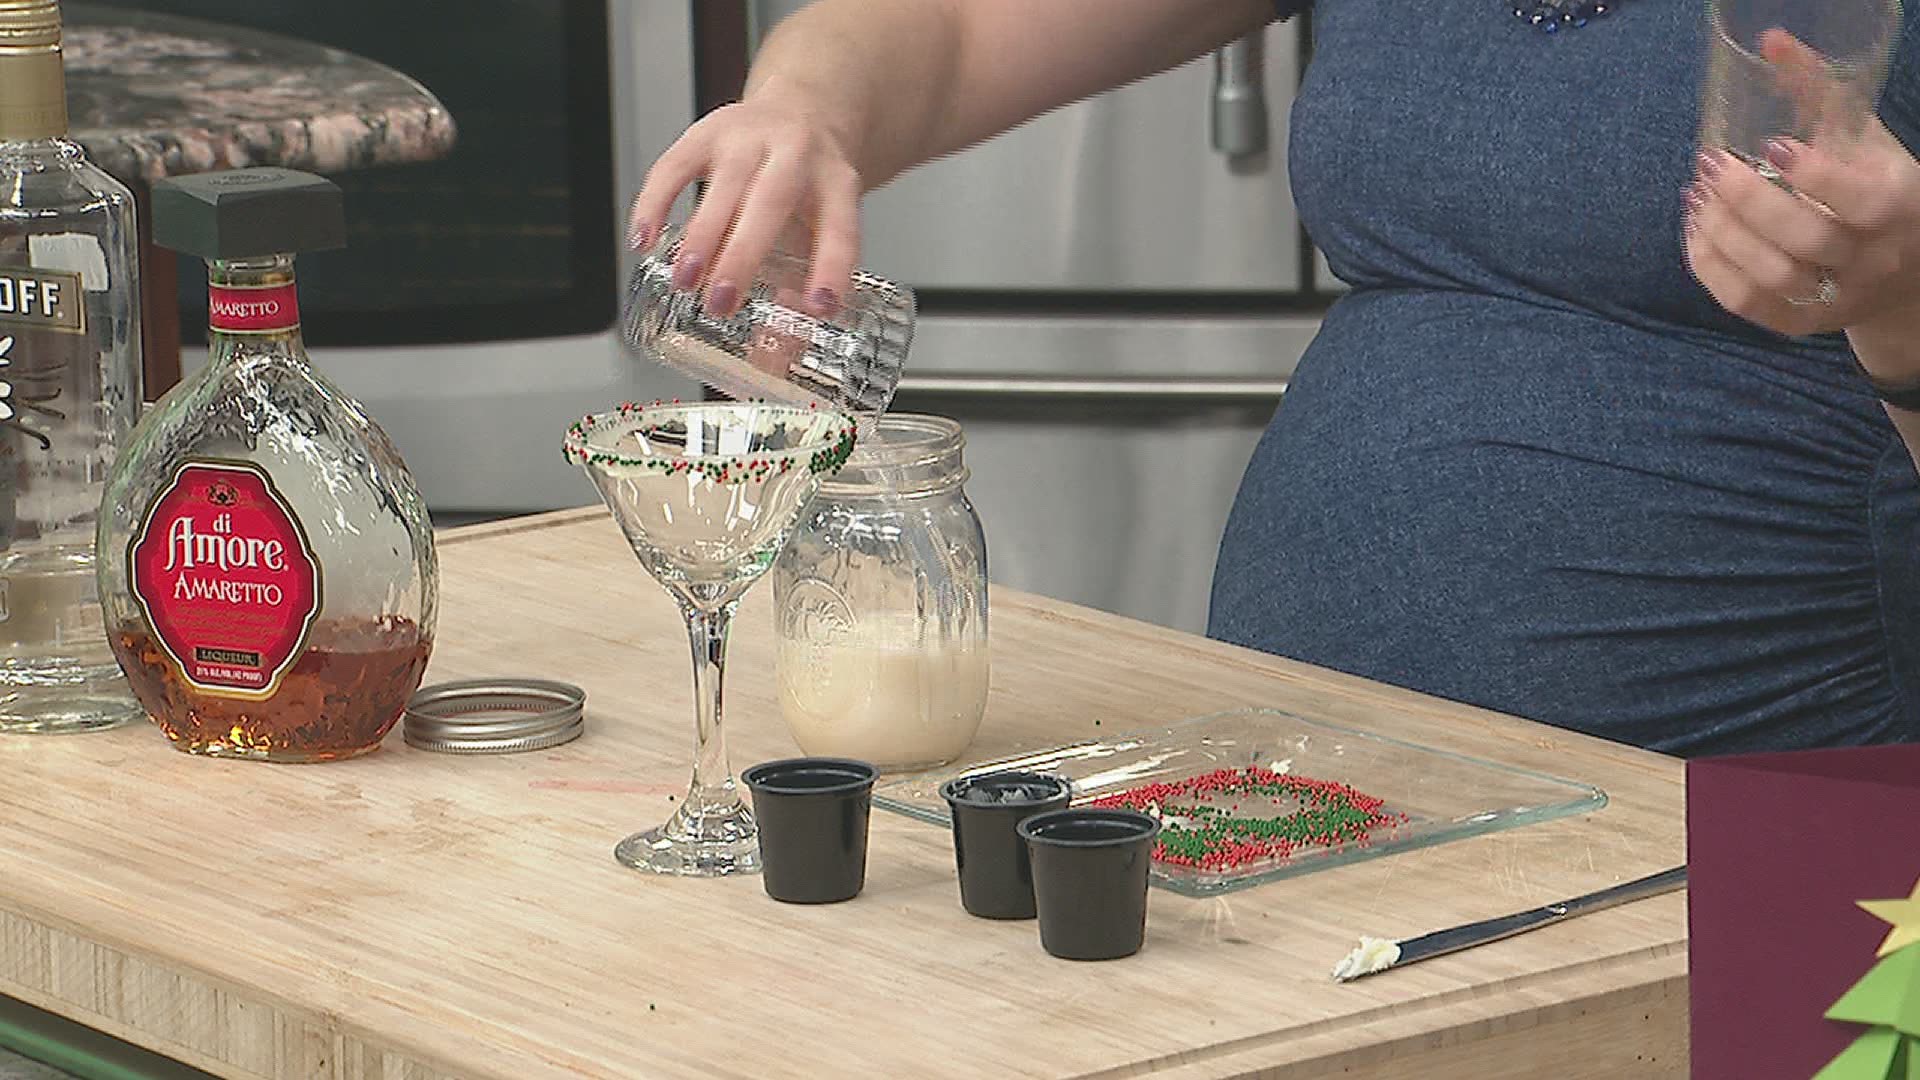 We transform the popular holiday dessert into a drink!